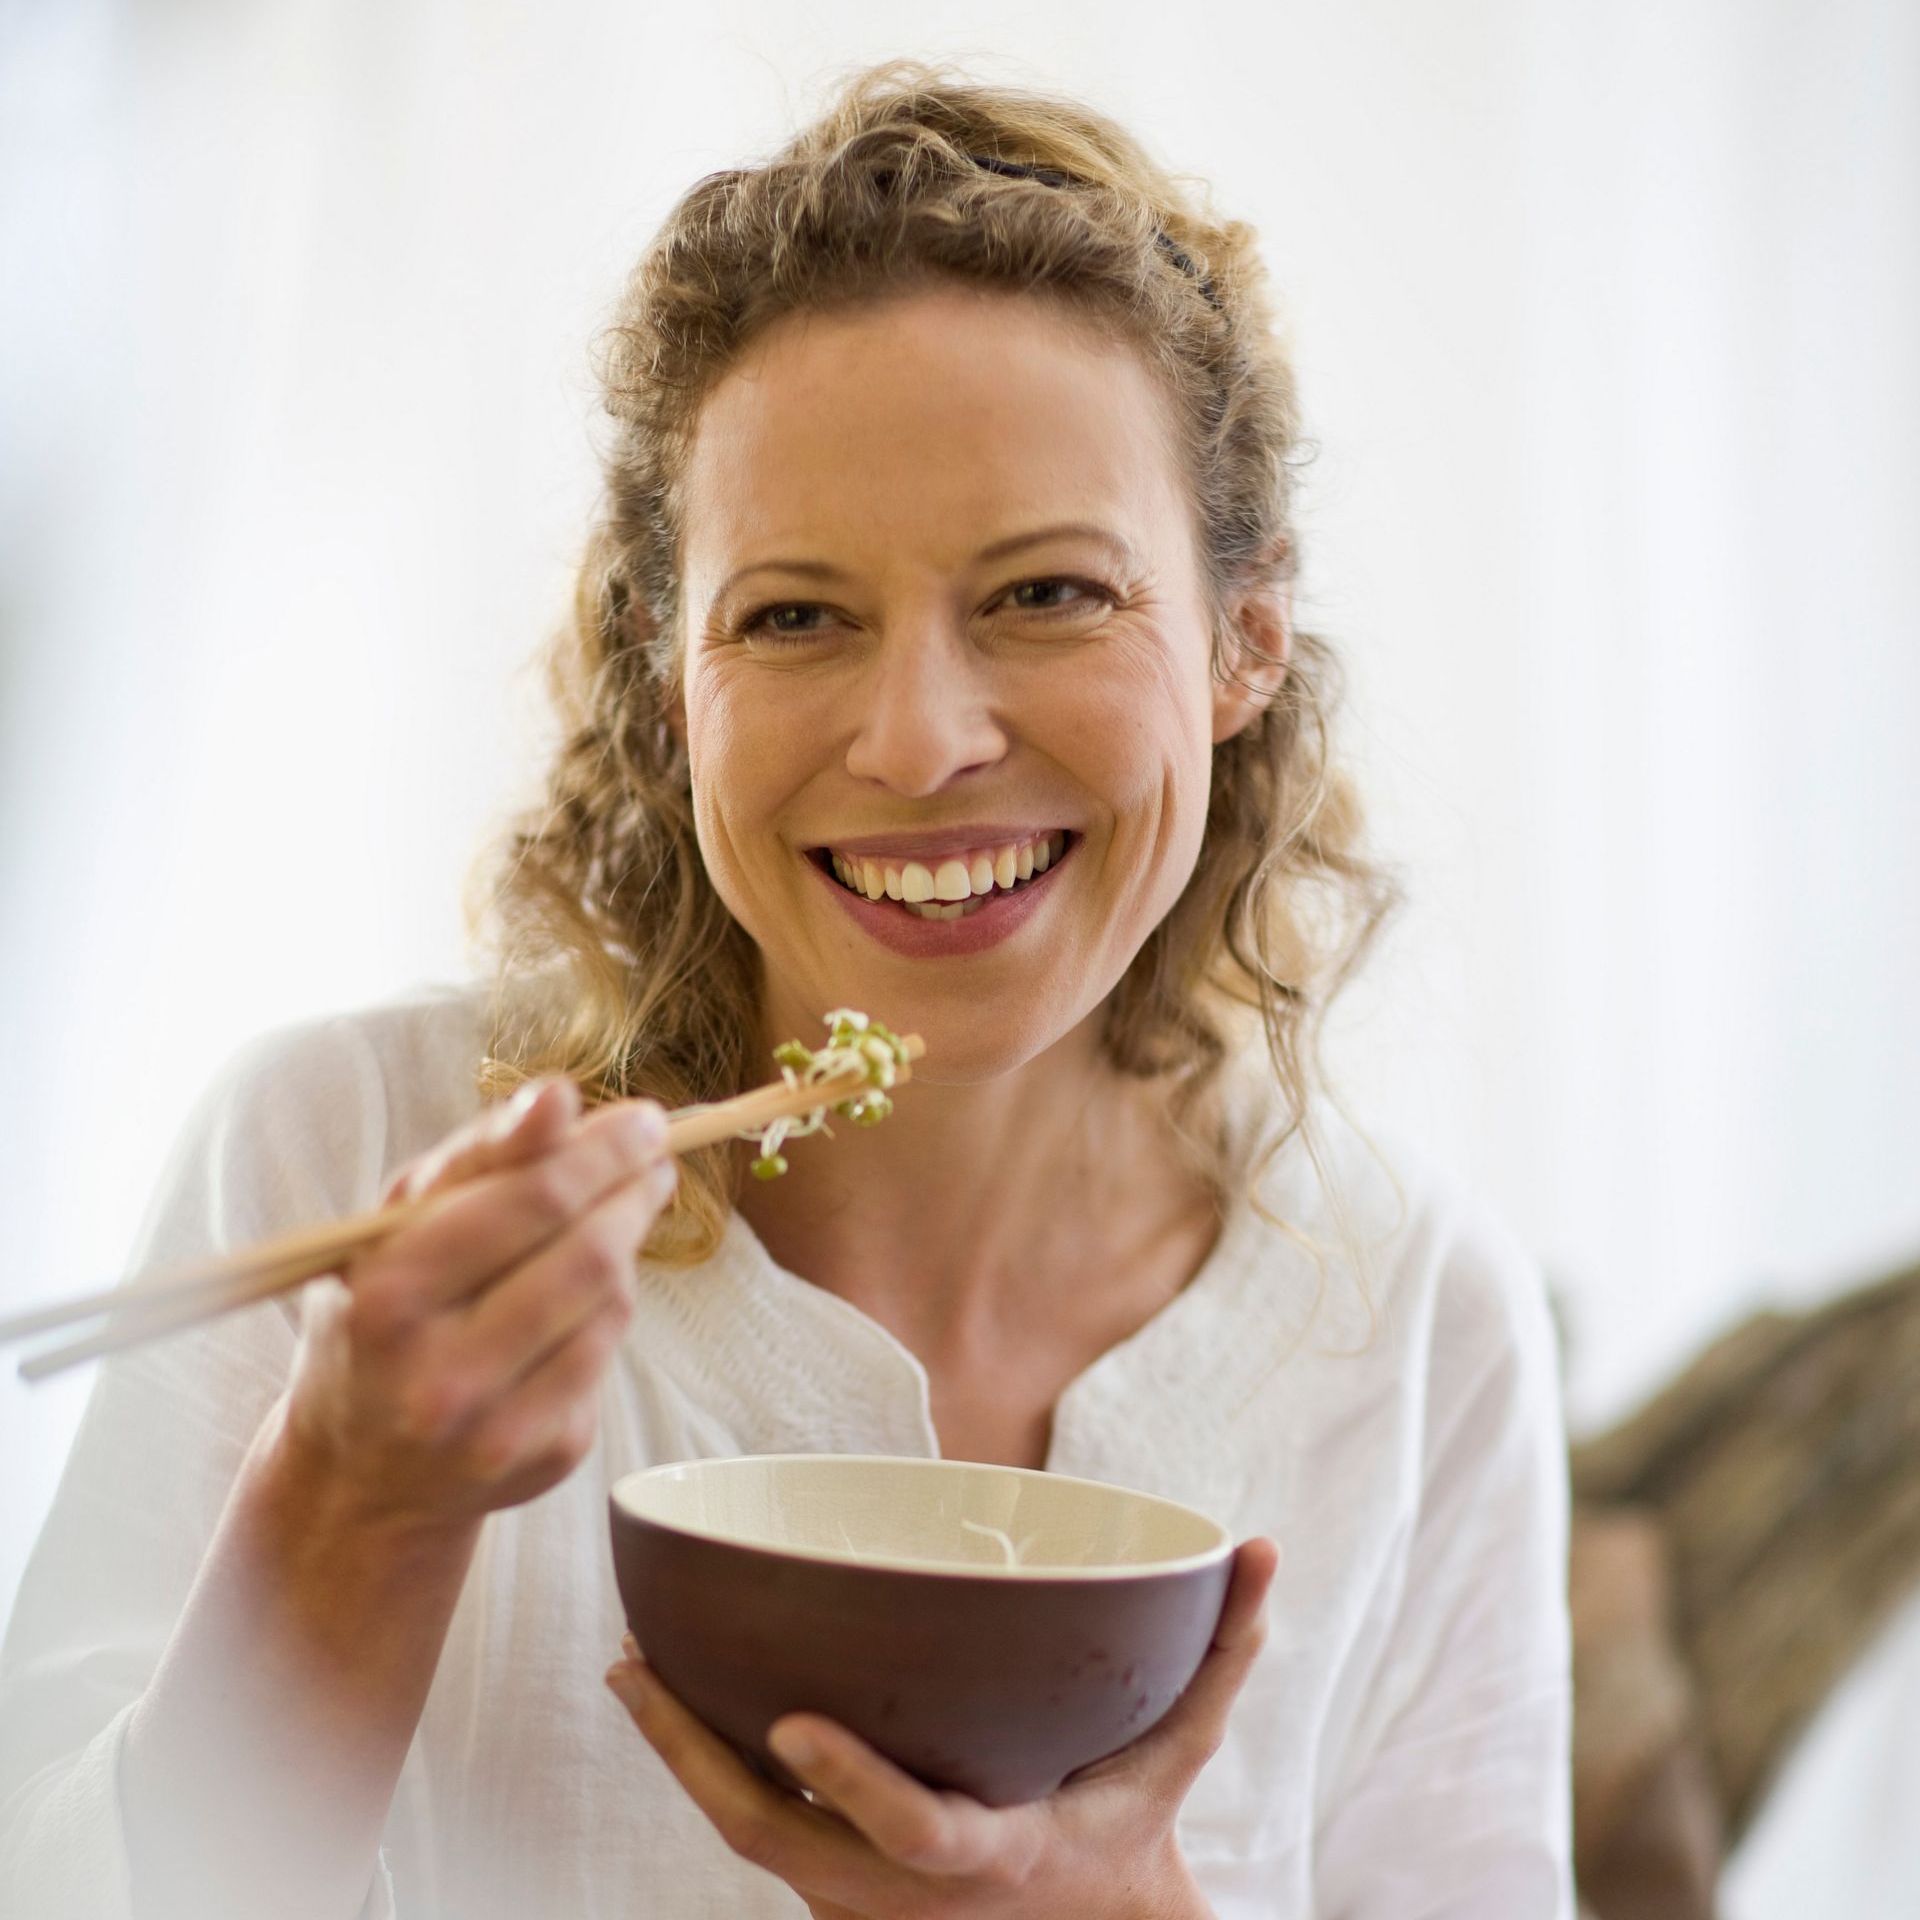 middle aged woman eating healthy meal